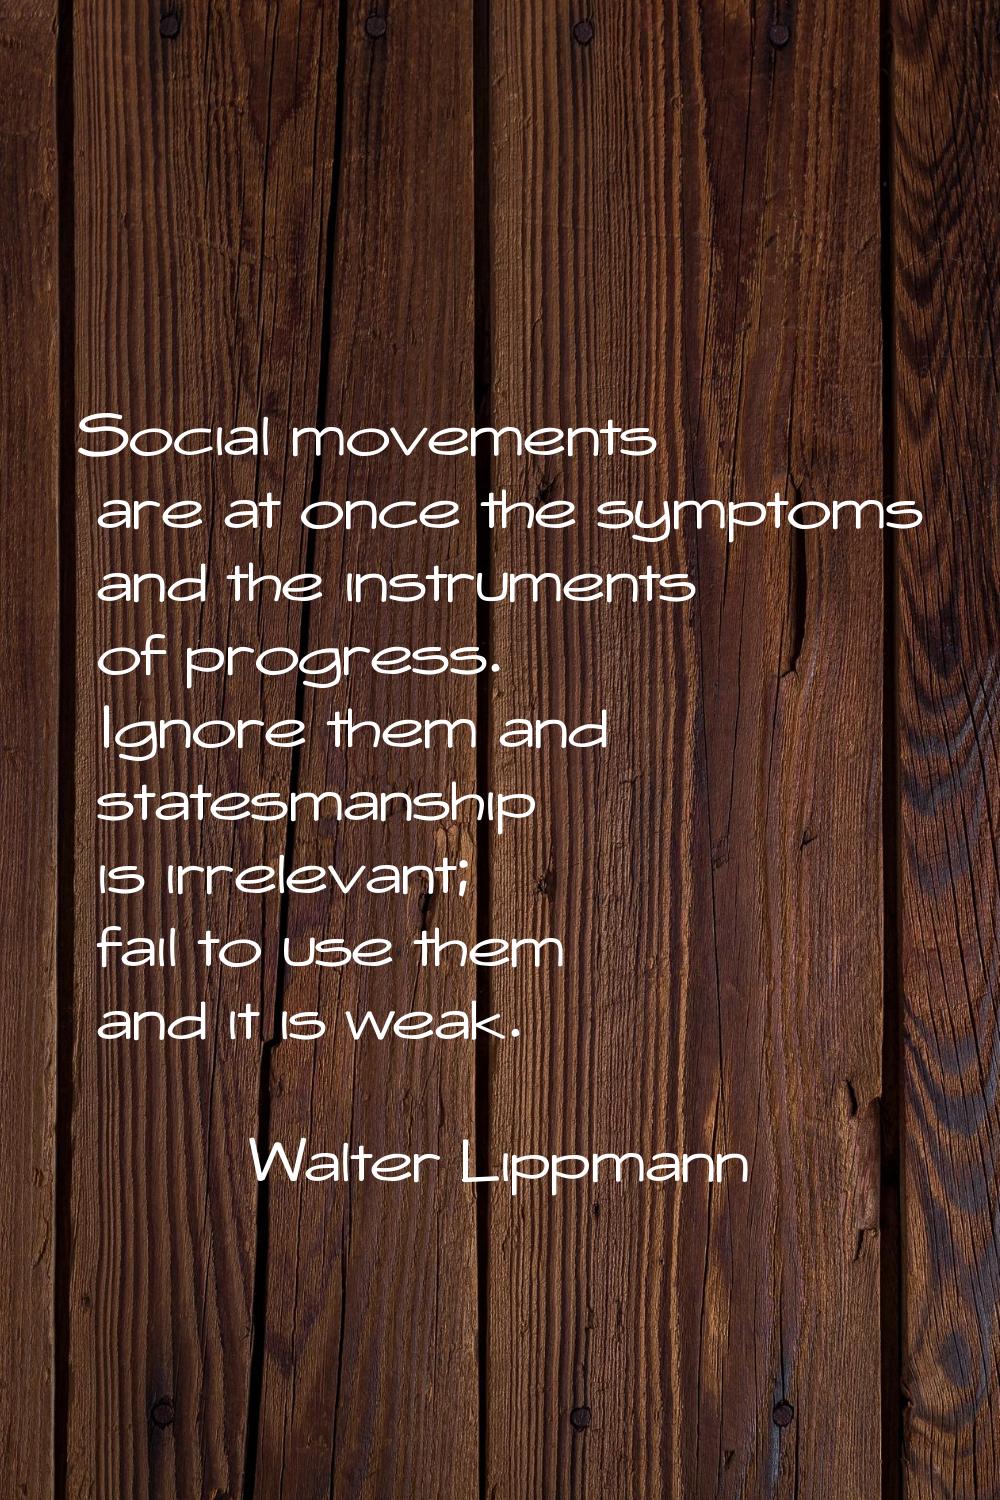 Social movements are at once the symptoms and the instruments of progress. Ignore them and statesma